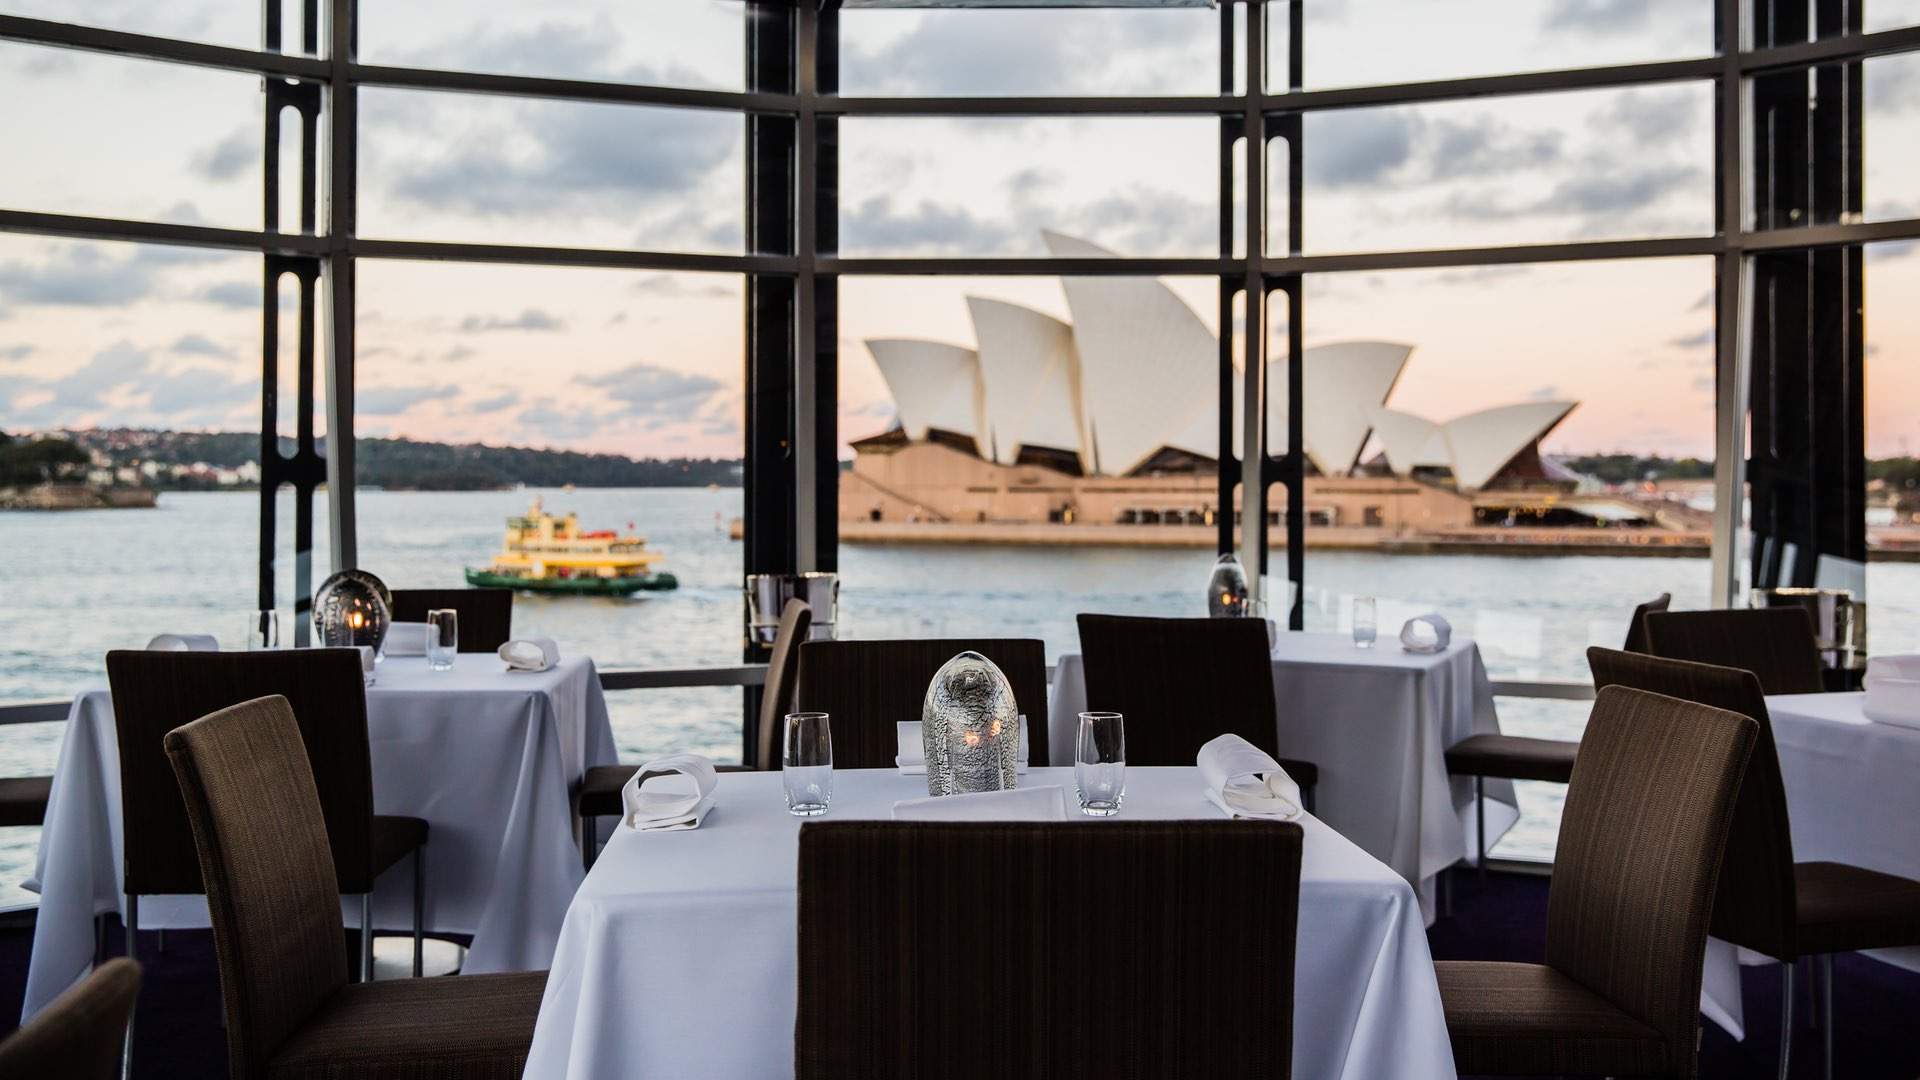 Sydney's Quay Officially Ranked in World's 100 Best Restaurants